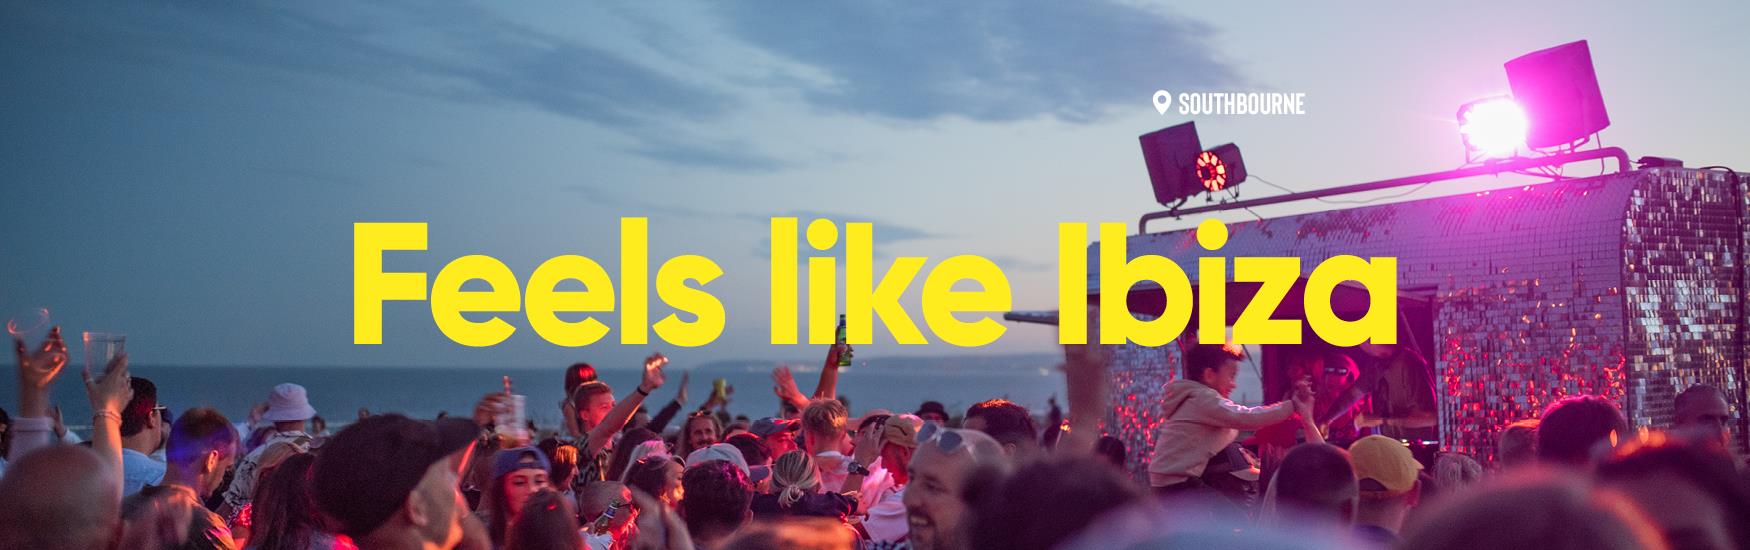 People dancing at a concert at a beach in Bournemouth with text that reads "feels like ibiza"